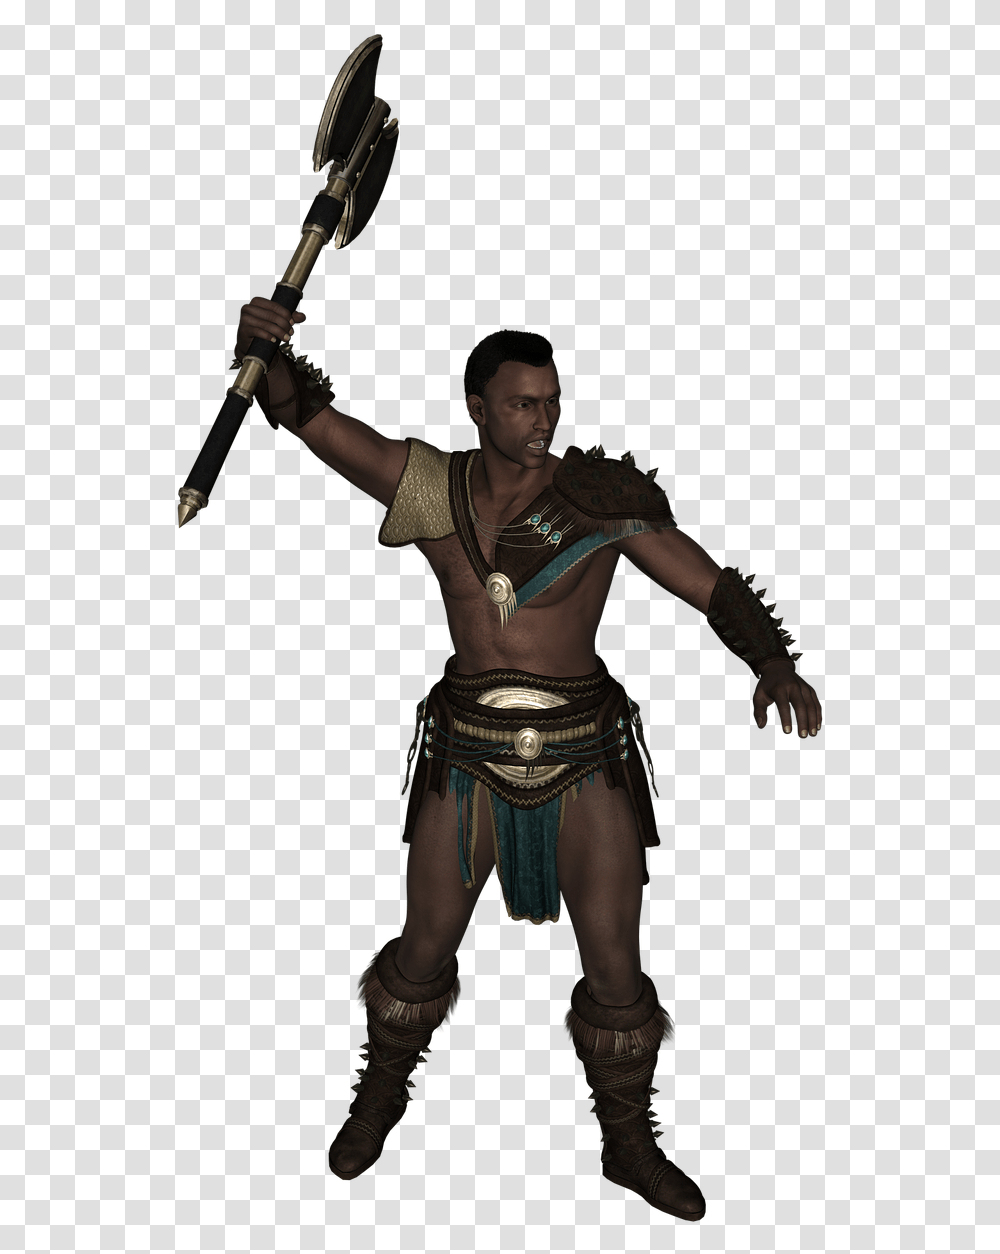 Tube Axe Dangerous Attack Muscles Man Warrior Man With Ax, Person, Costume, Ninja Transparent Png